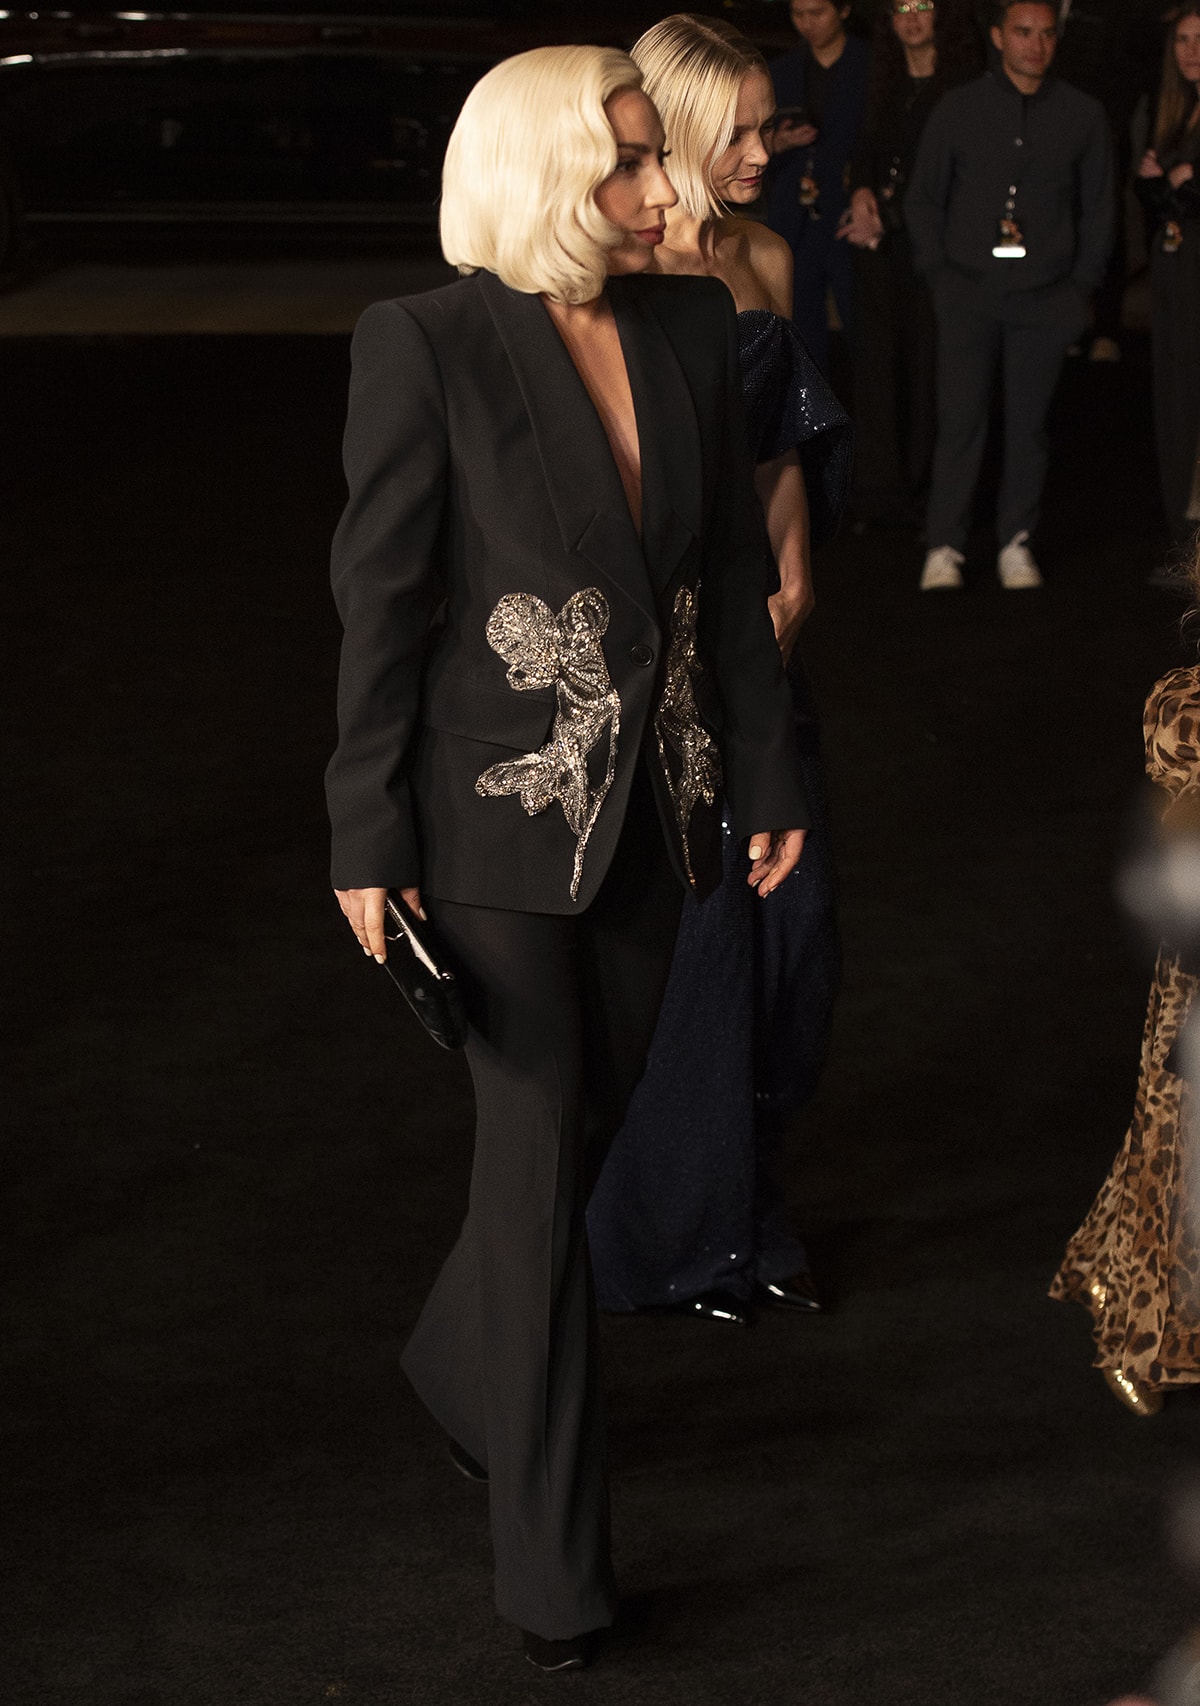 Lady Gaga embraces a shirtless blazer look in a black Alexander McQueen orchid crystal-embroidered blazer and slightly flared wool pants